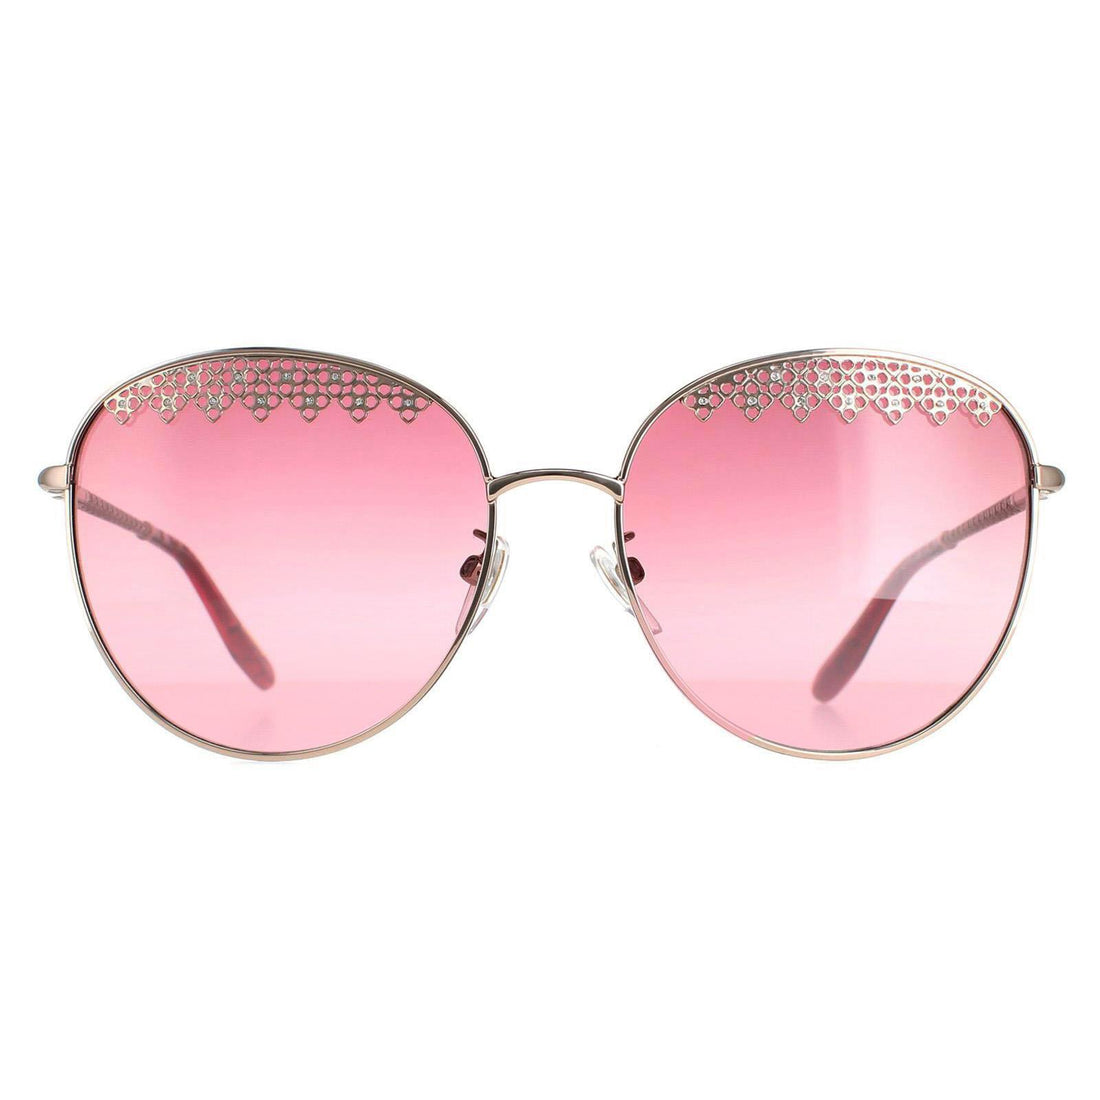 Chopard SCHF75S Sunglasses Shiny Red Gold / Pink Gradient